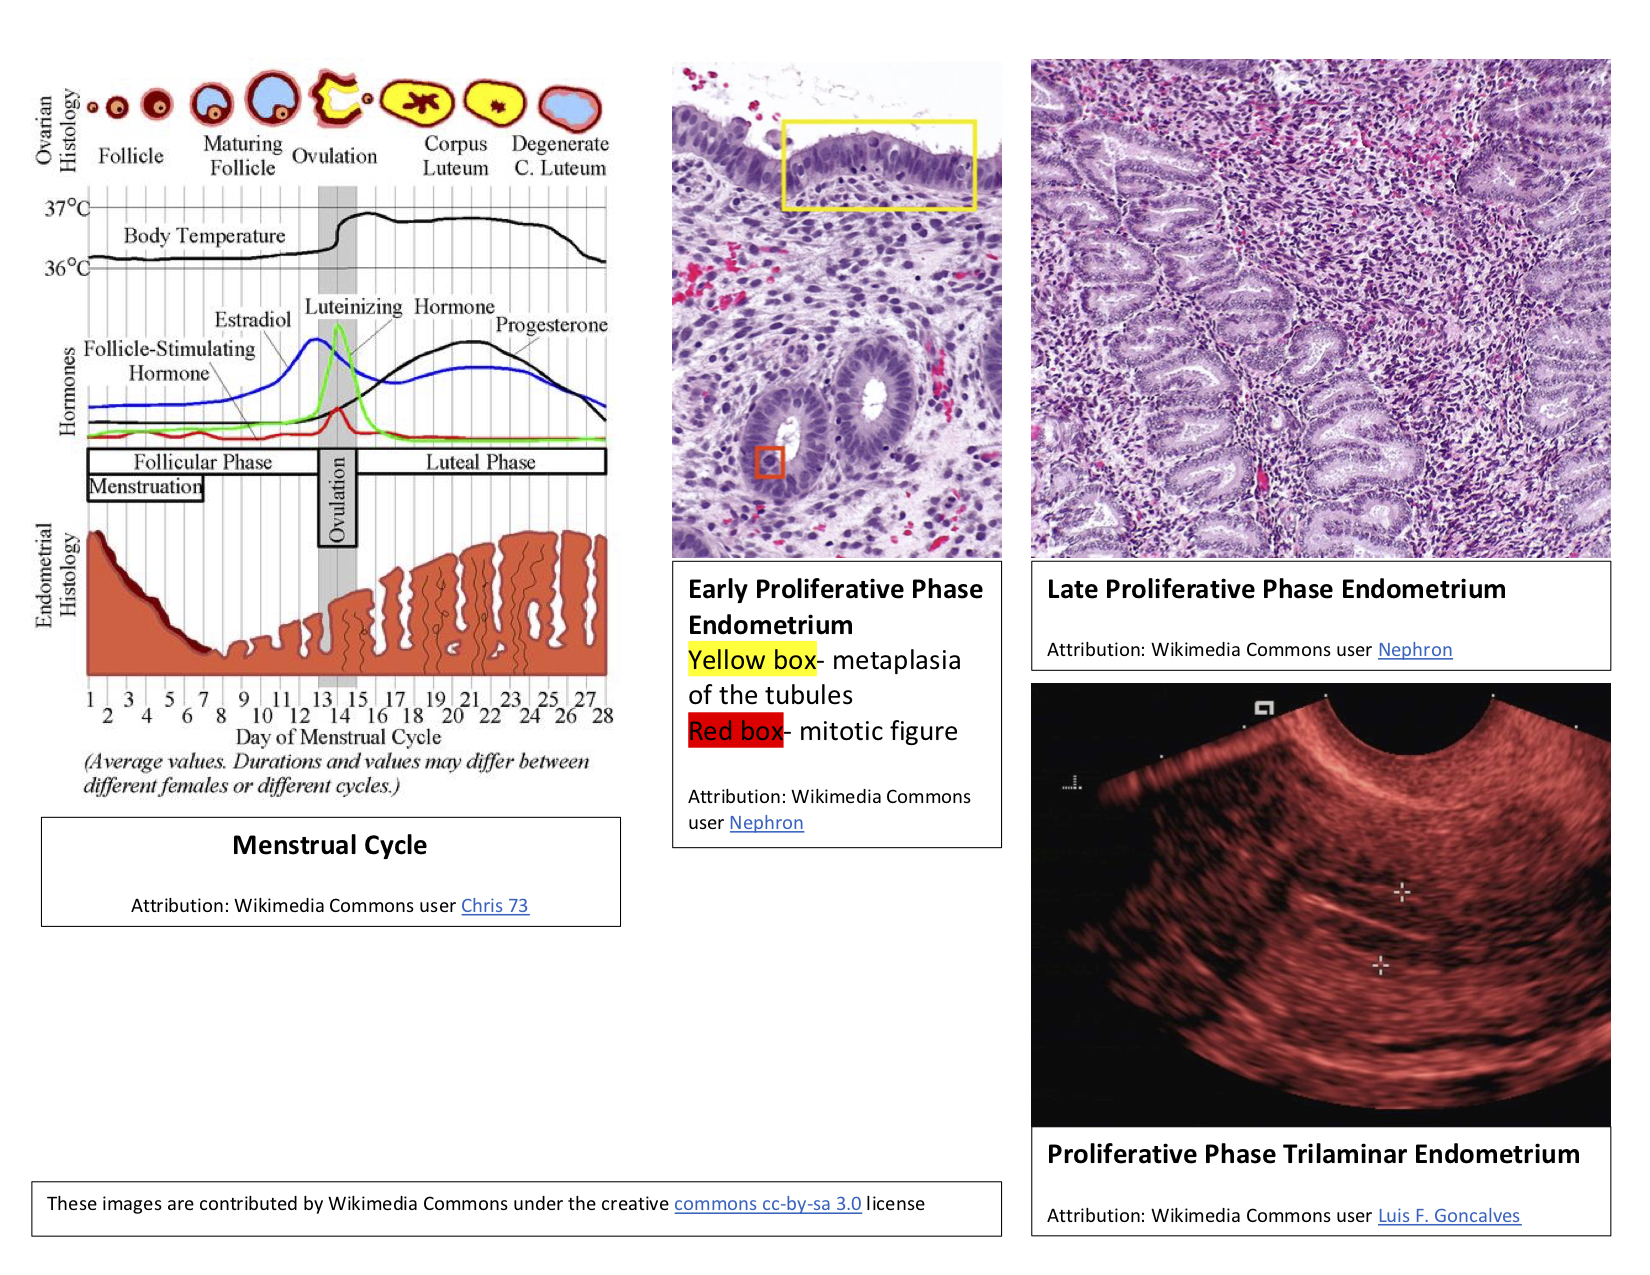 Images of the proliferative phase endometrium and the menstrual cycle.